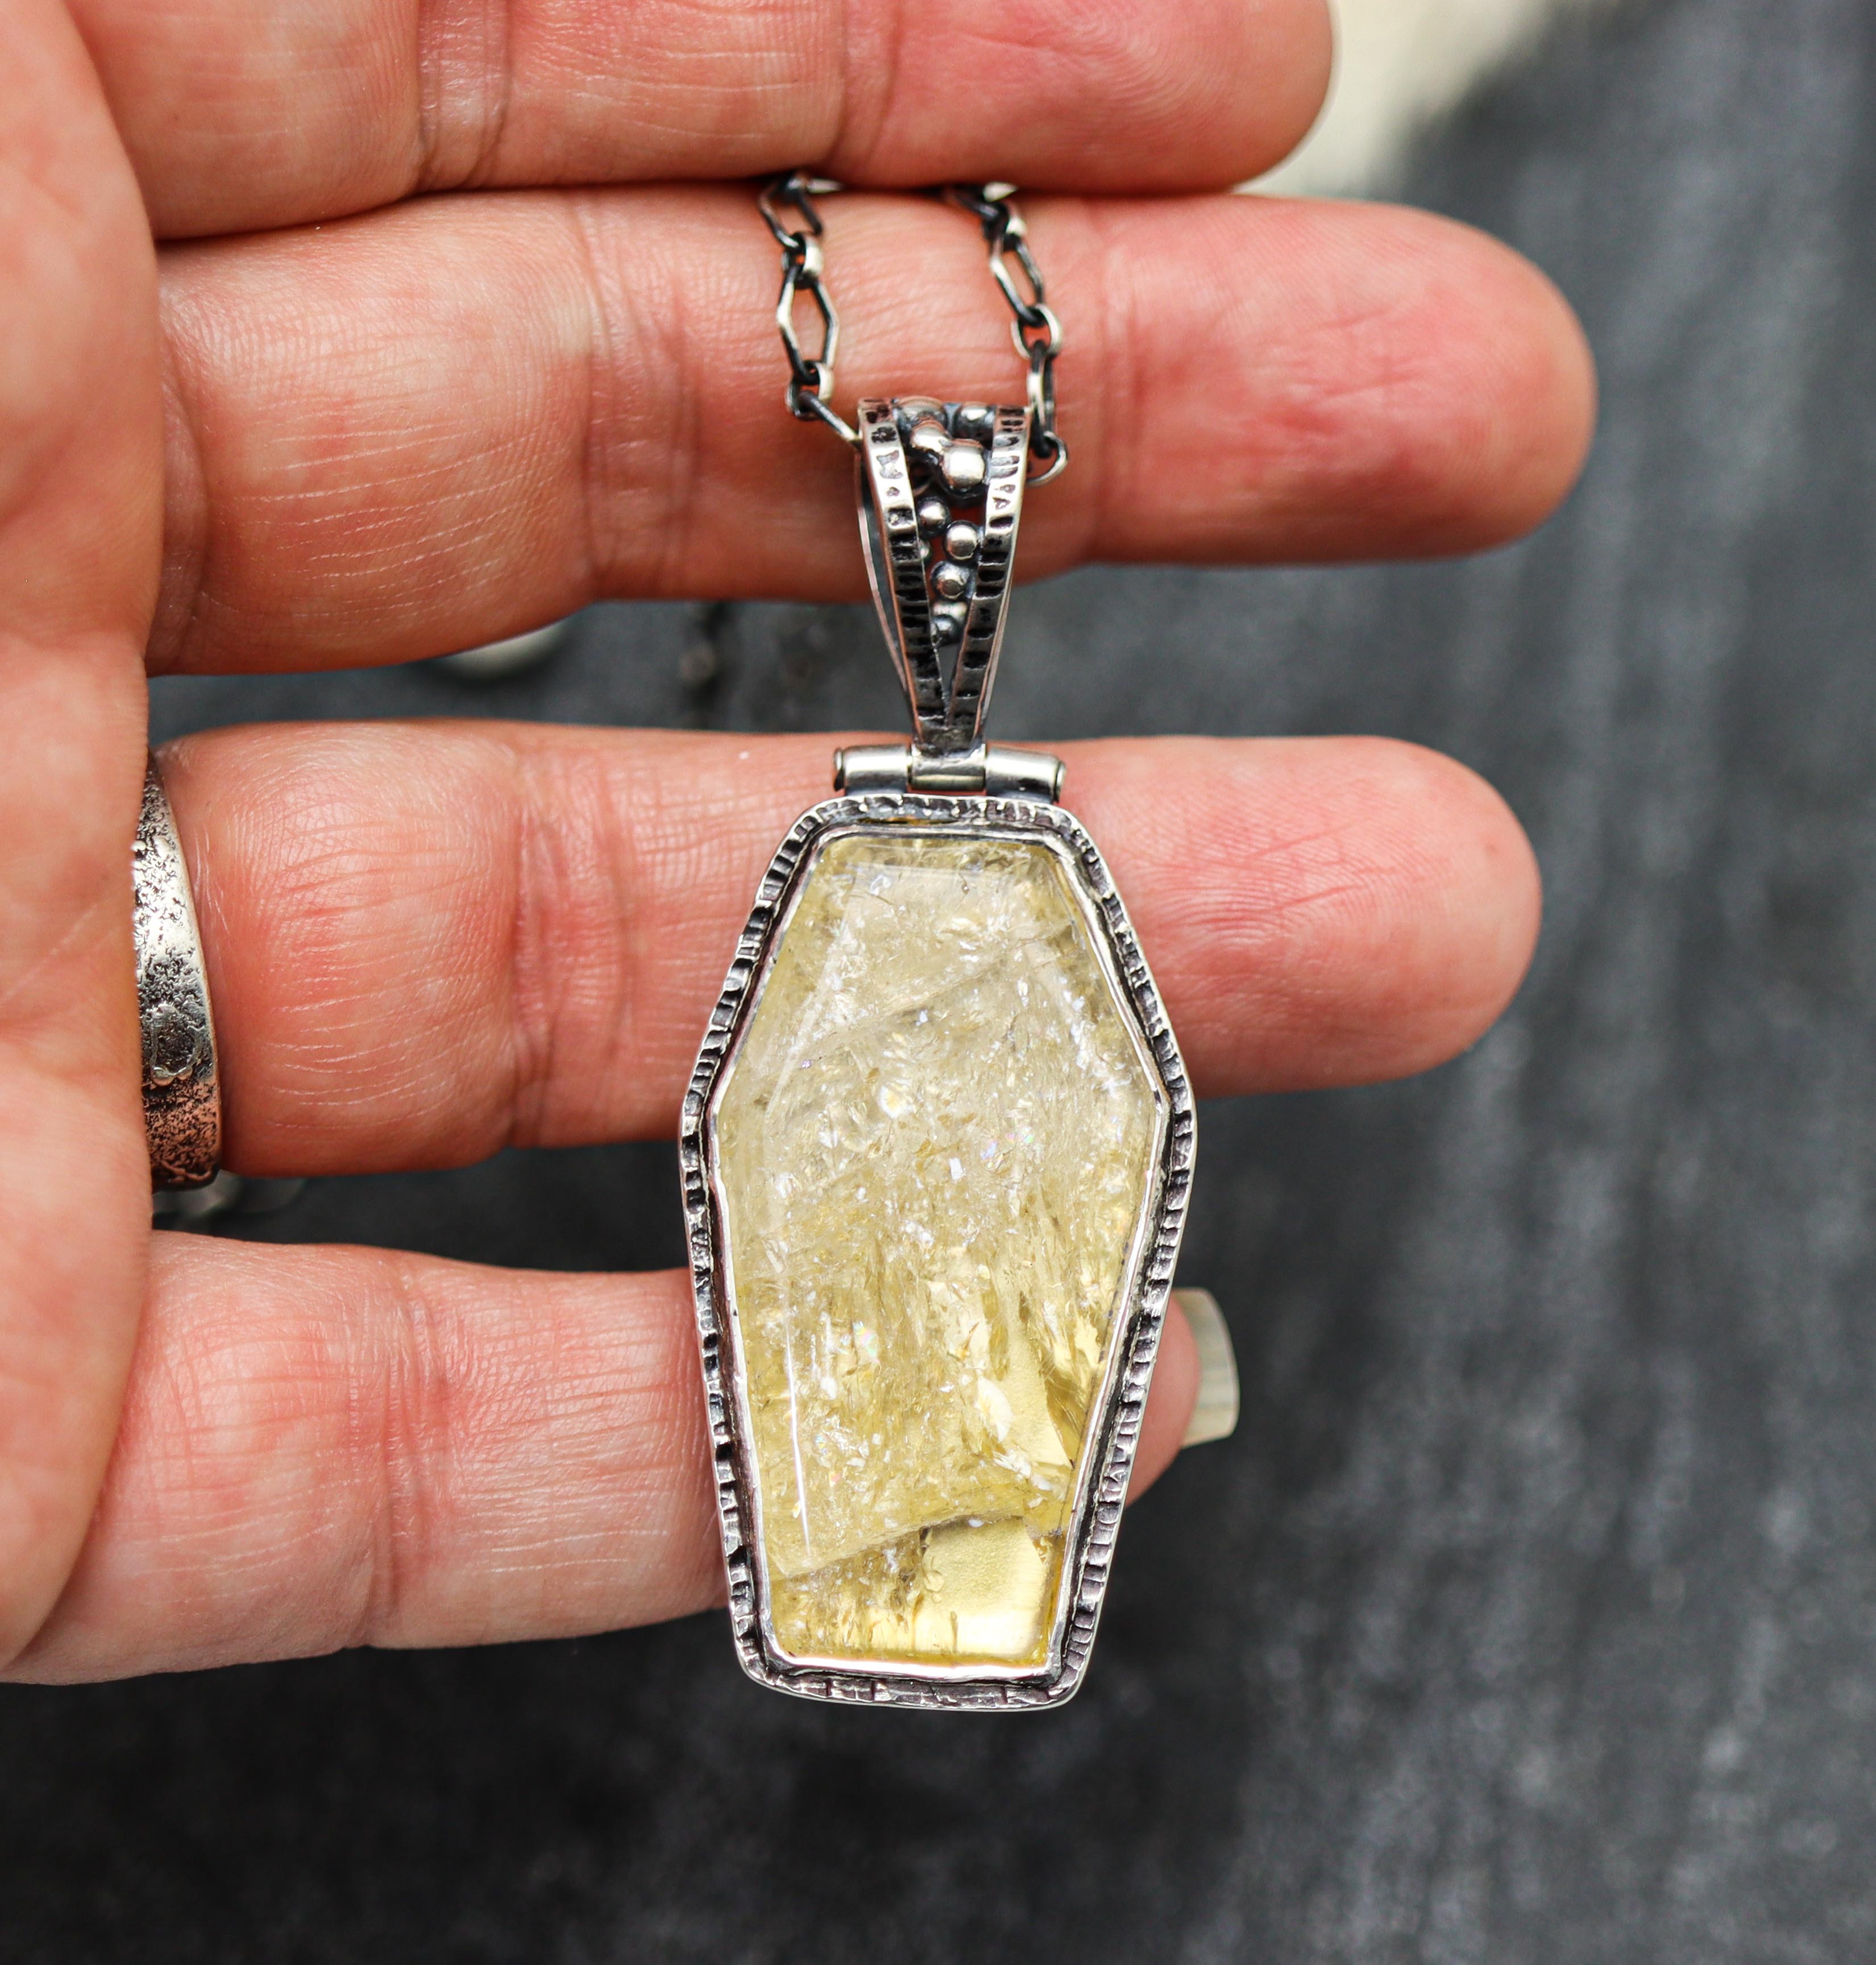 *ON SALE* Citrine Pendant Sterling Silver One Of a Kind Gemstone Necklace